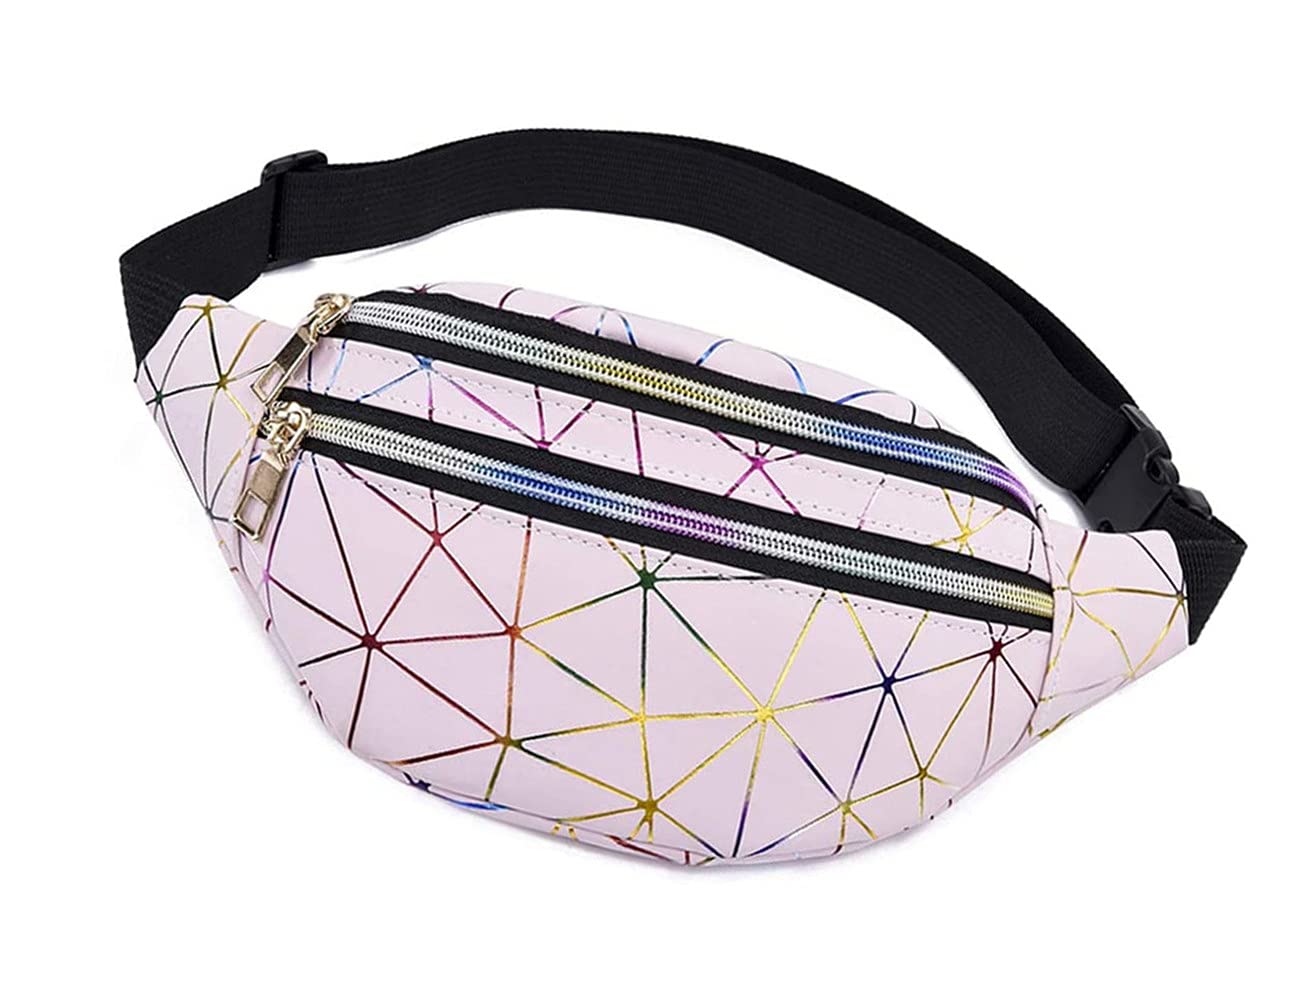 KOMUNJ Fanny Pack Holographic Waist Bag Shiny Belt Bag Festival Rave Bumbags for Ladies Travel Party Sports Running Hiking, Holographic Fanny Pack with PU Leather (Fanny Pack Holographic Pink)